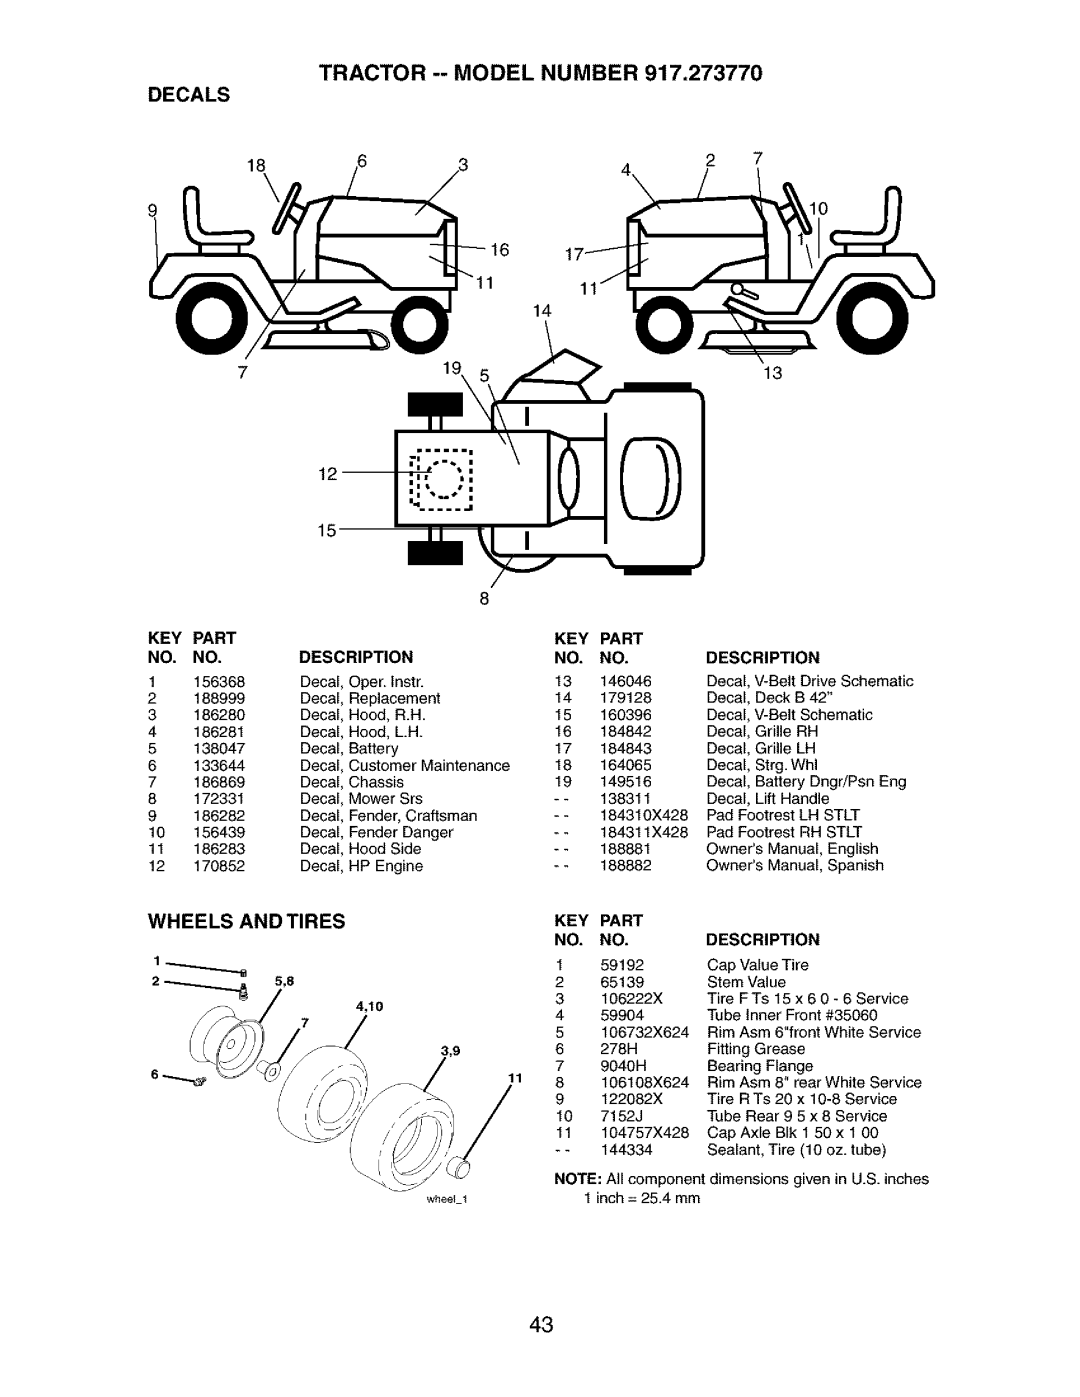 Craftsman 917.27377 manual Tractor --Model Number Decals, Wheels And Tires 